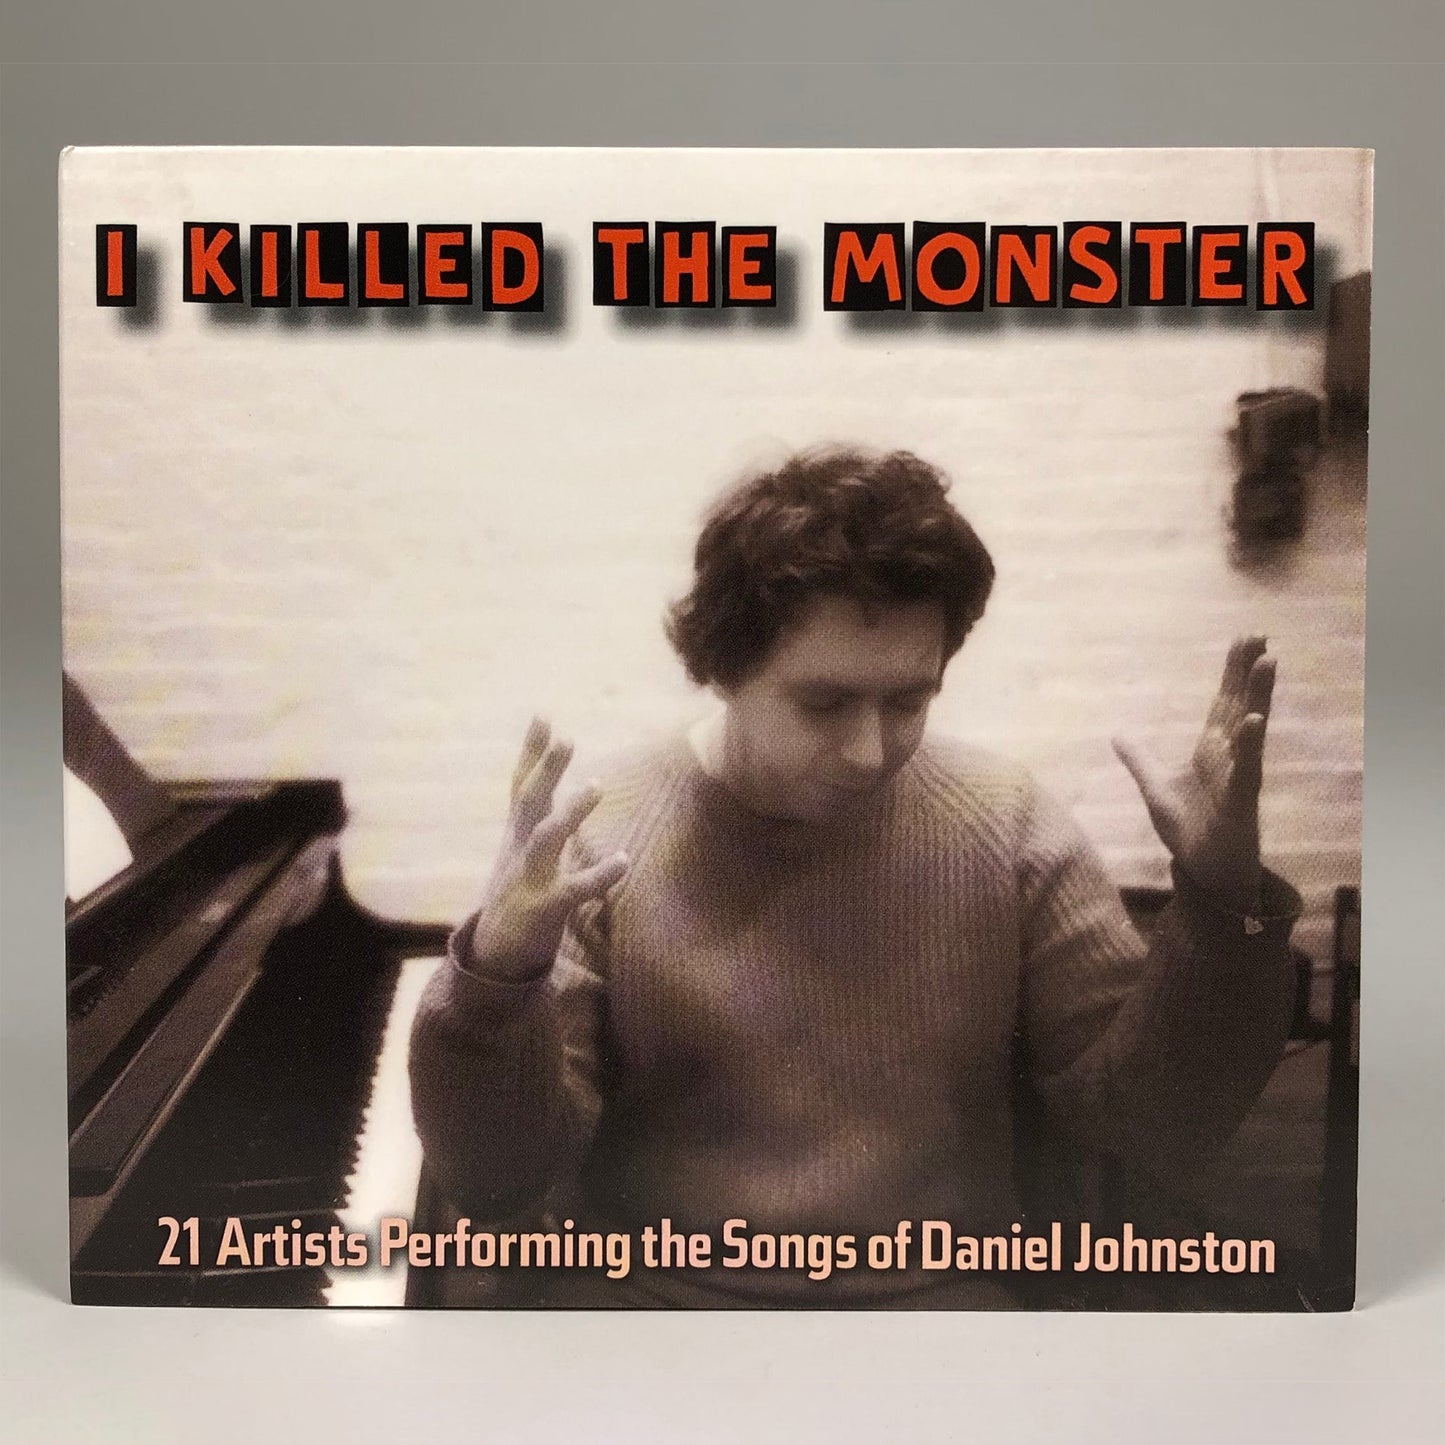 Various Artists - I Killed the Monster - 21 Artists Performing the Songs of Daniel Johnston (Second-Shimmy 2006)